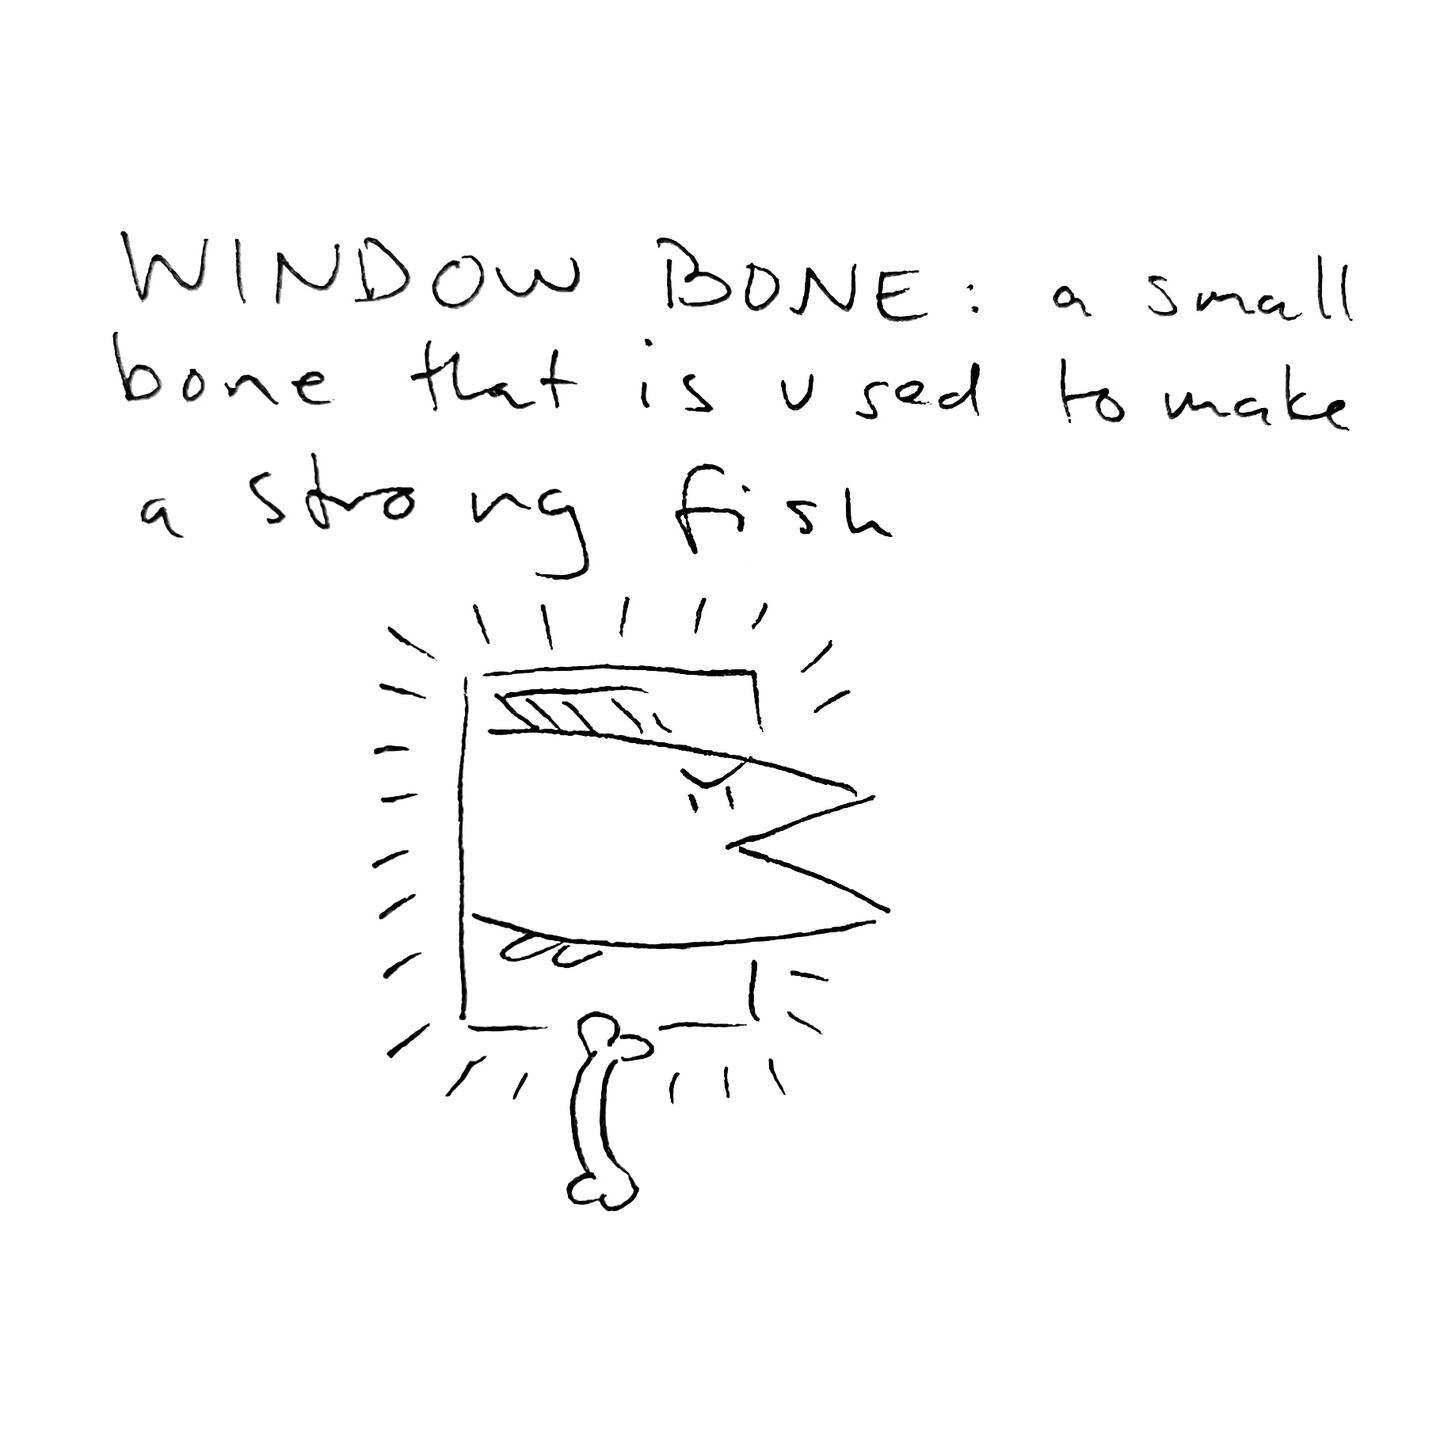 WINDOW BONE: a small bone that is used to make a strong fish. The drawing depicts a small curved bone above which is a glowing portal through which a fish is emerging.